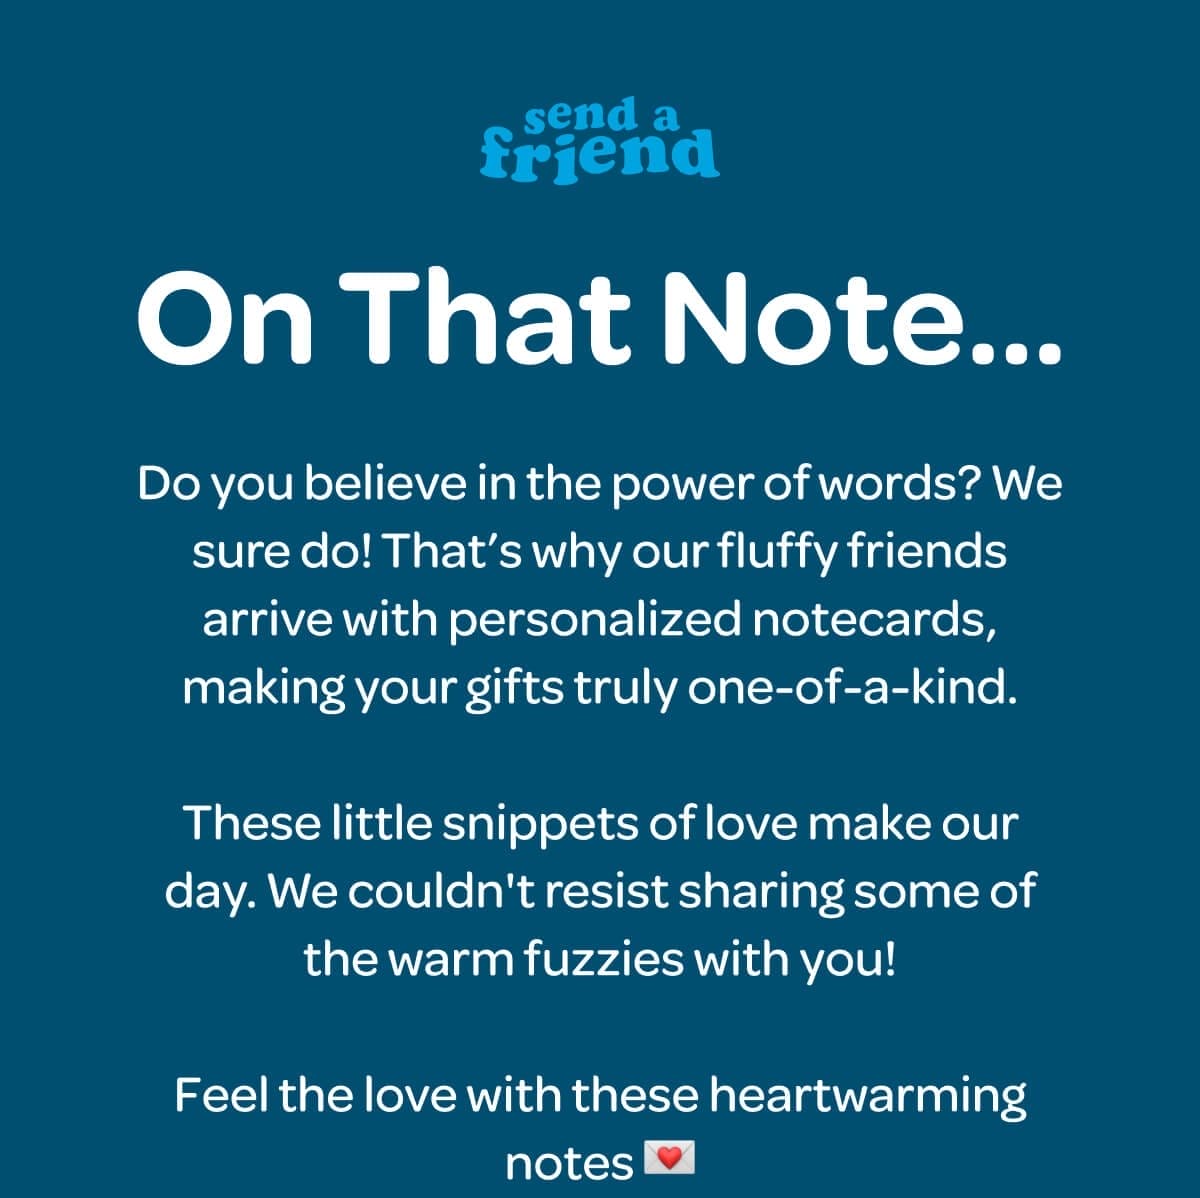 On That Note… Do you believe in the power of words? We sure do! That’s why our fluffy friends arrive with personalized notecards, making your gifts truly one-of-a-kind. These little snippets of love make our day. We couldn't resist sharing some of the warm fuzzies with you! Feel the love with these heartwarming notes 💌